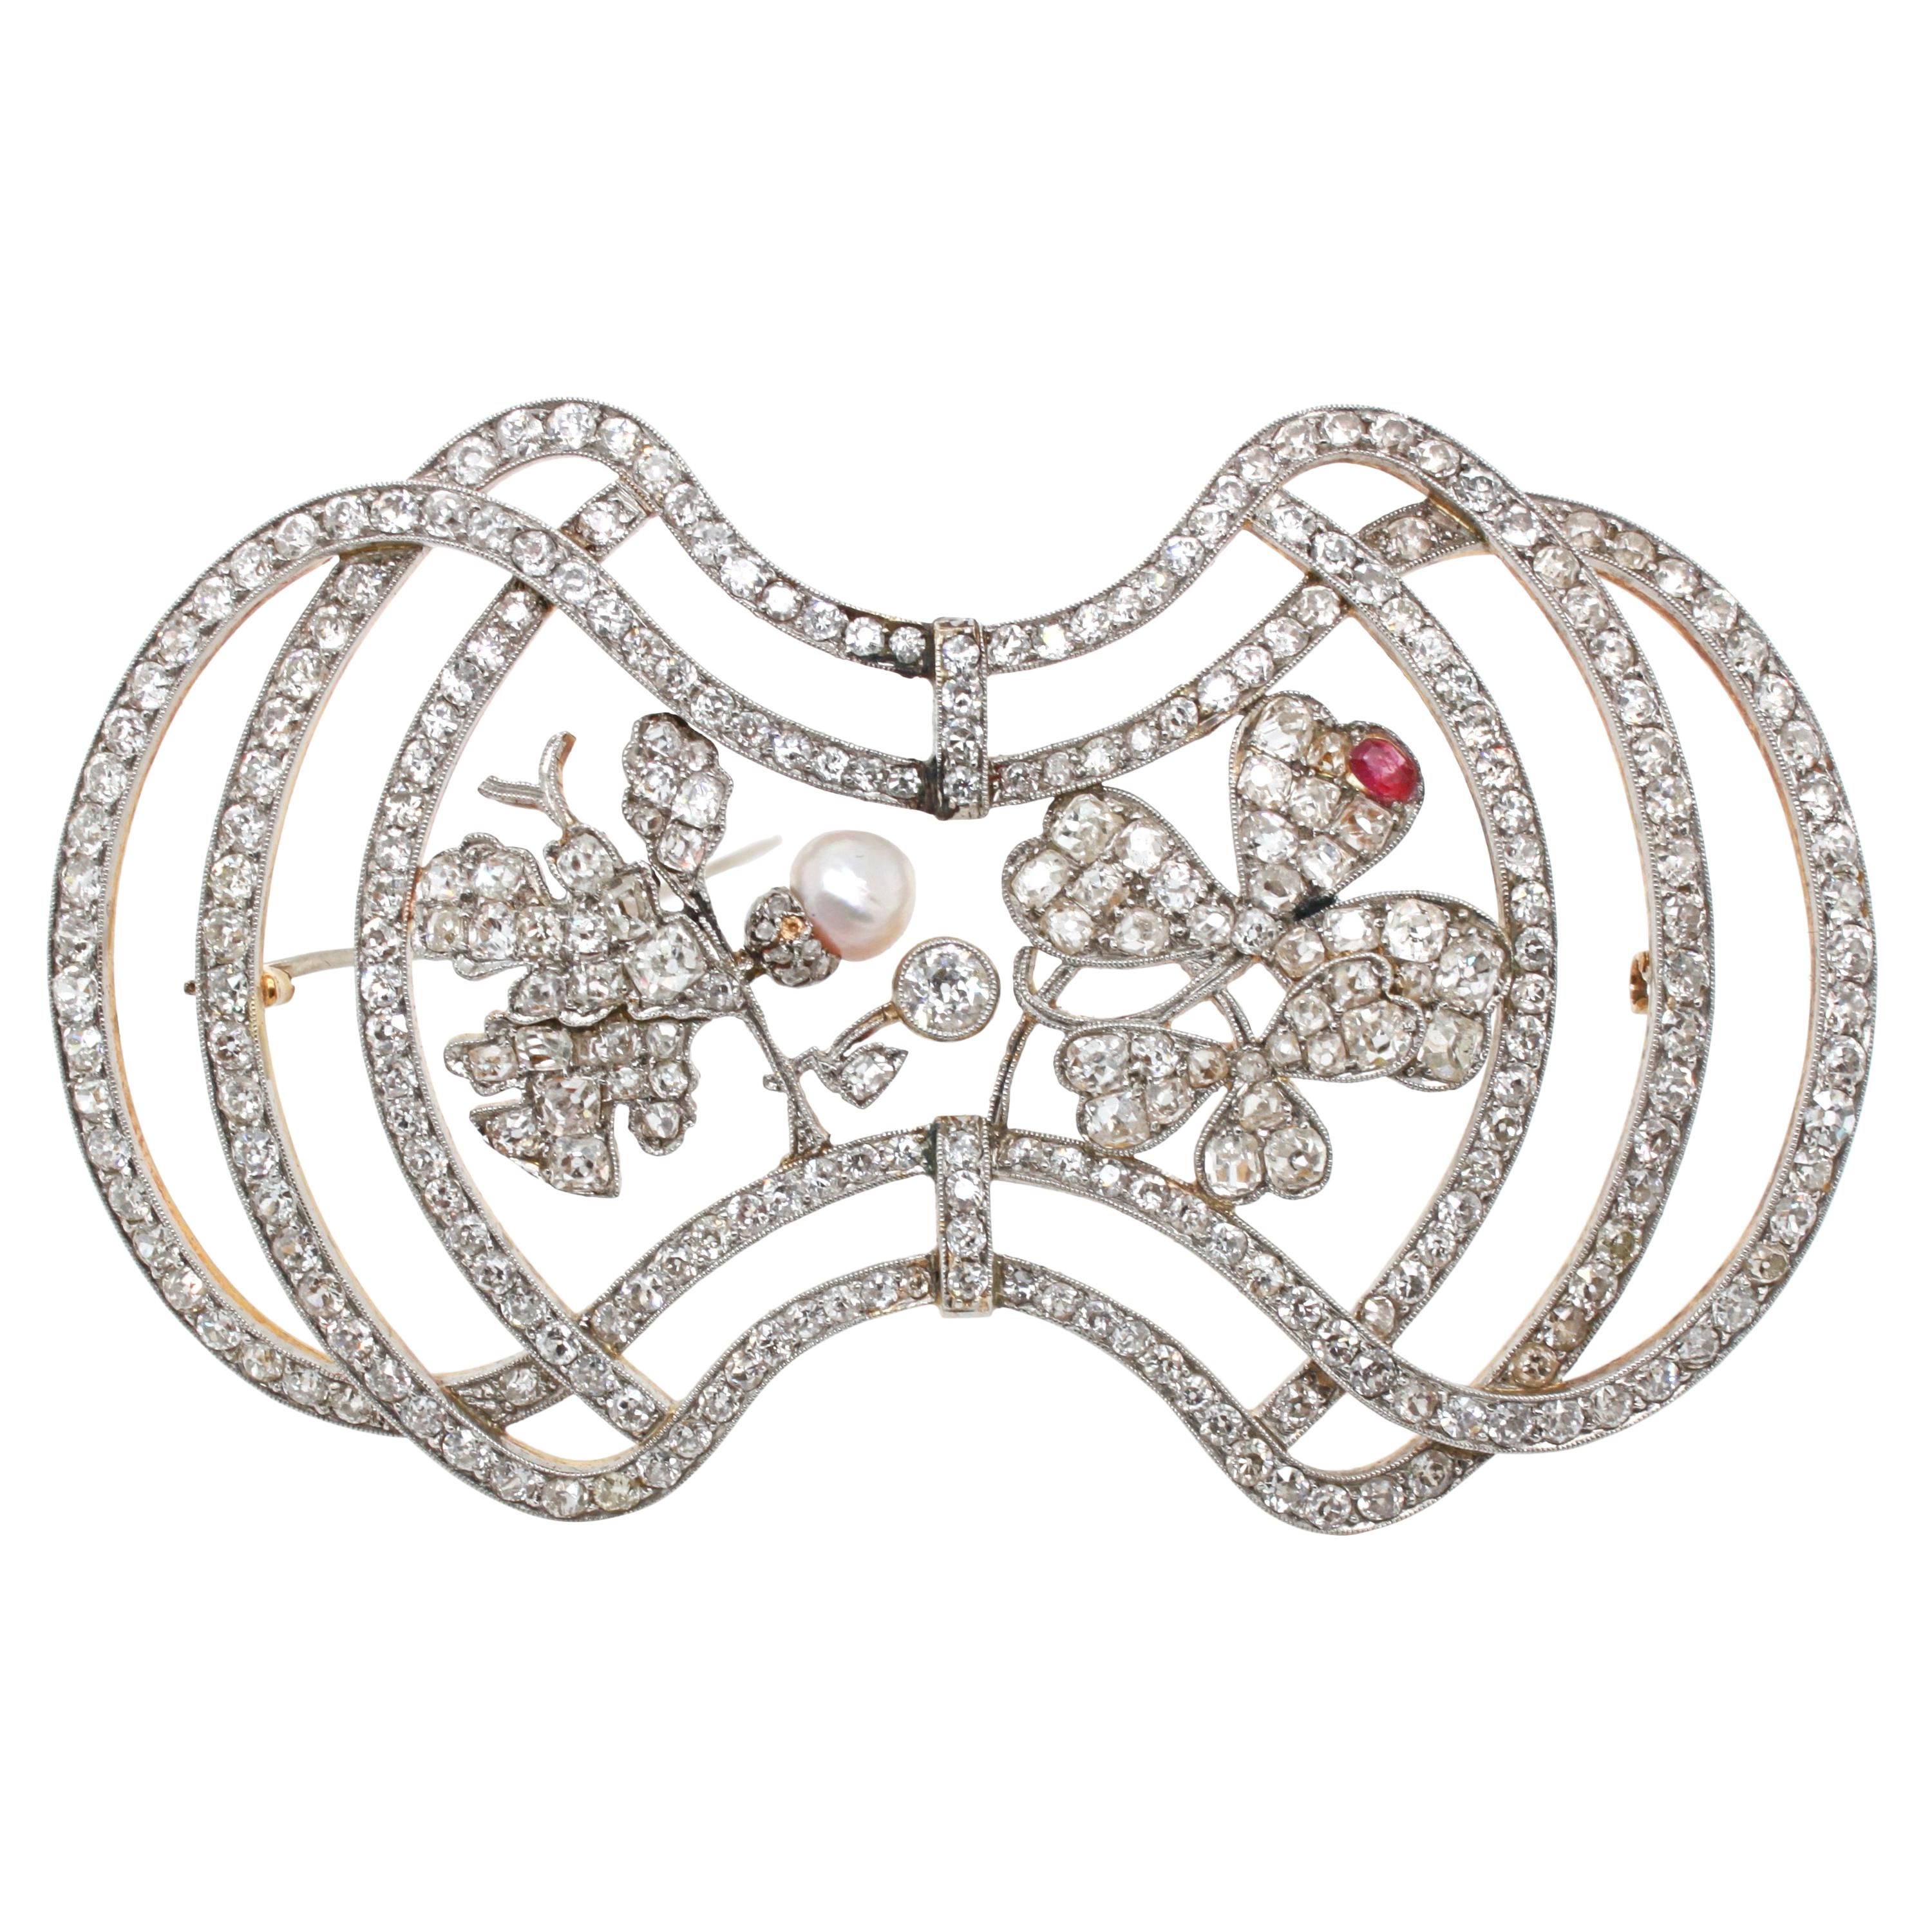 Diamond Pearl and Ruby Oak Leaf and Trefoil Clover Brooch, Art Nouveau, ca 1910s For Sale